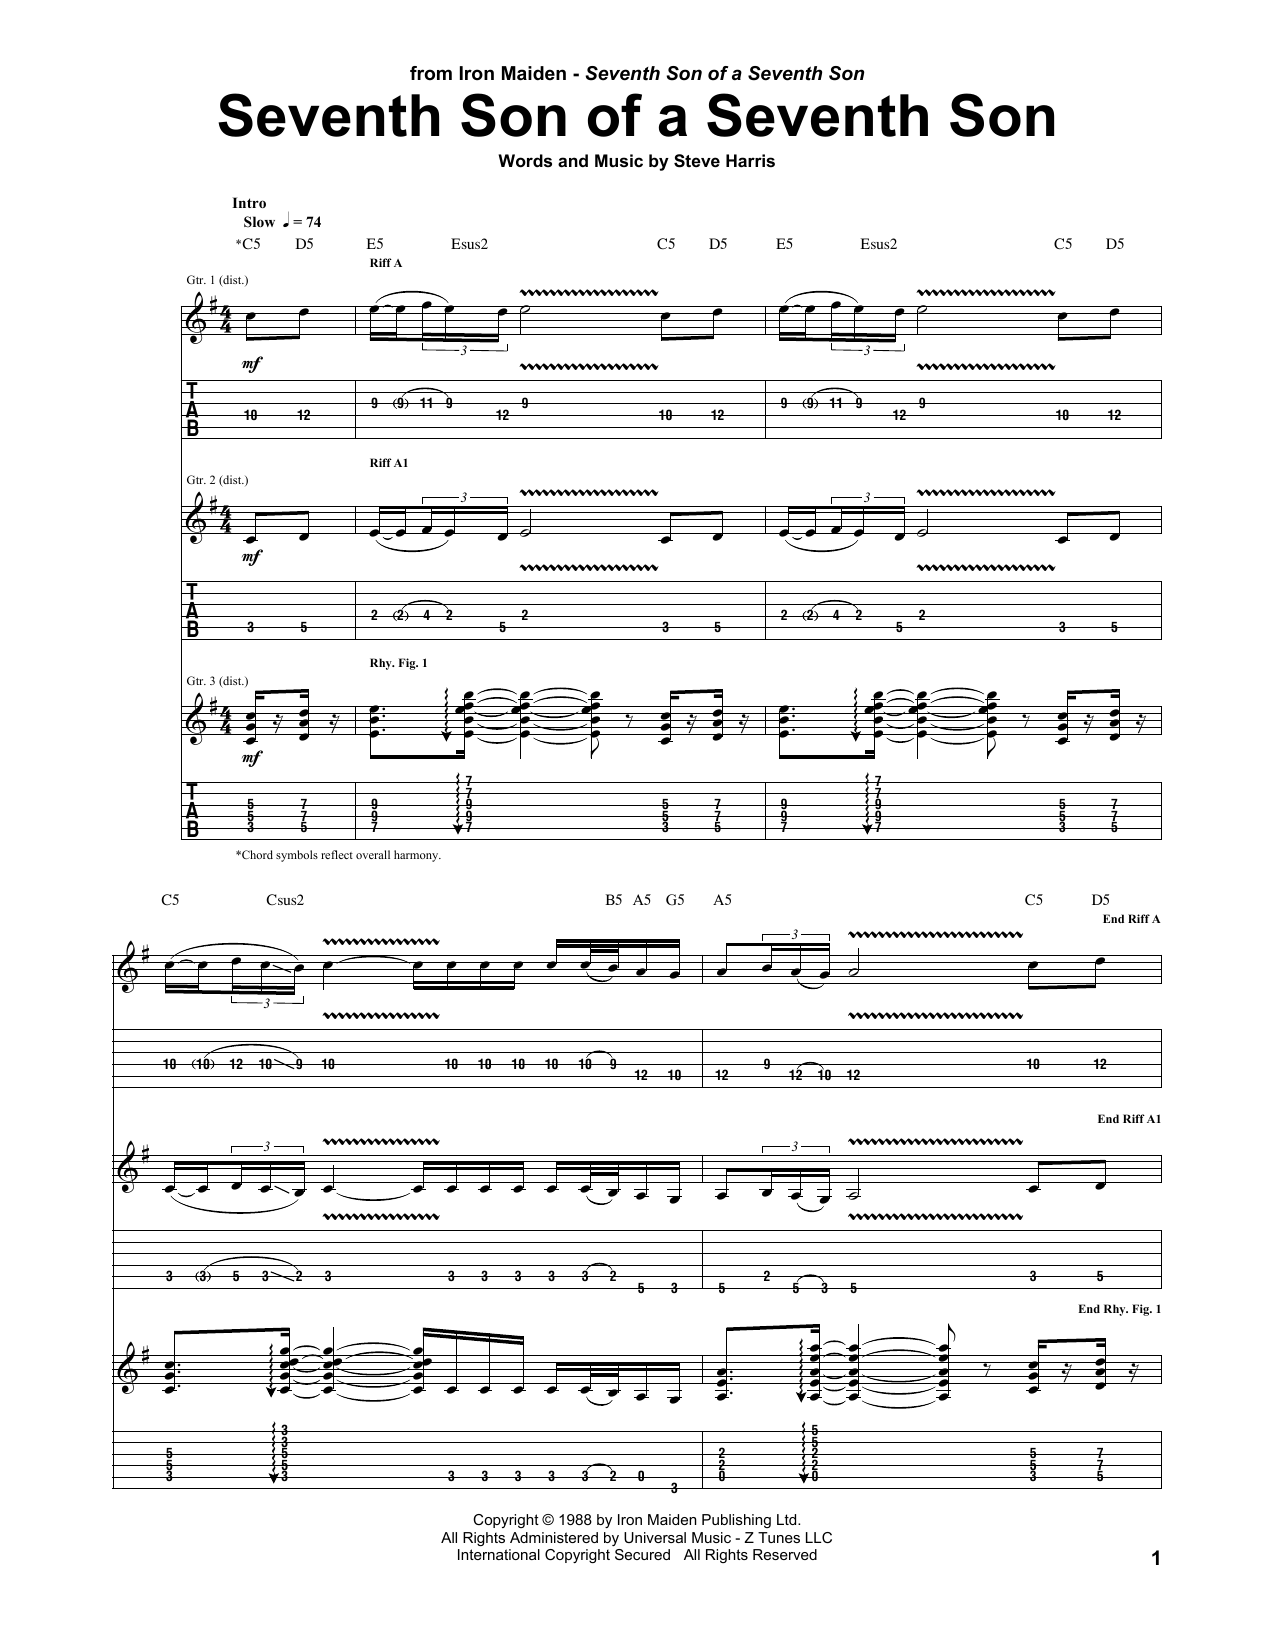 Download Iron Maiden Seventh Son Of A Seventh Son Sheet Music